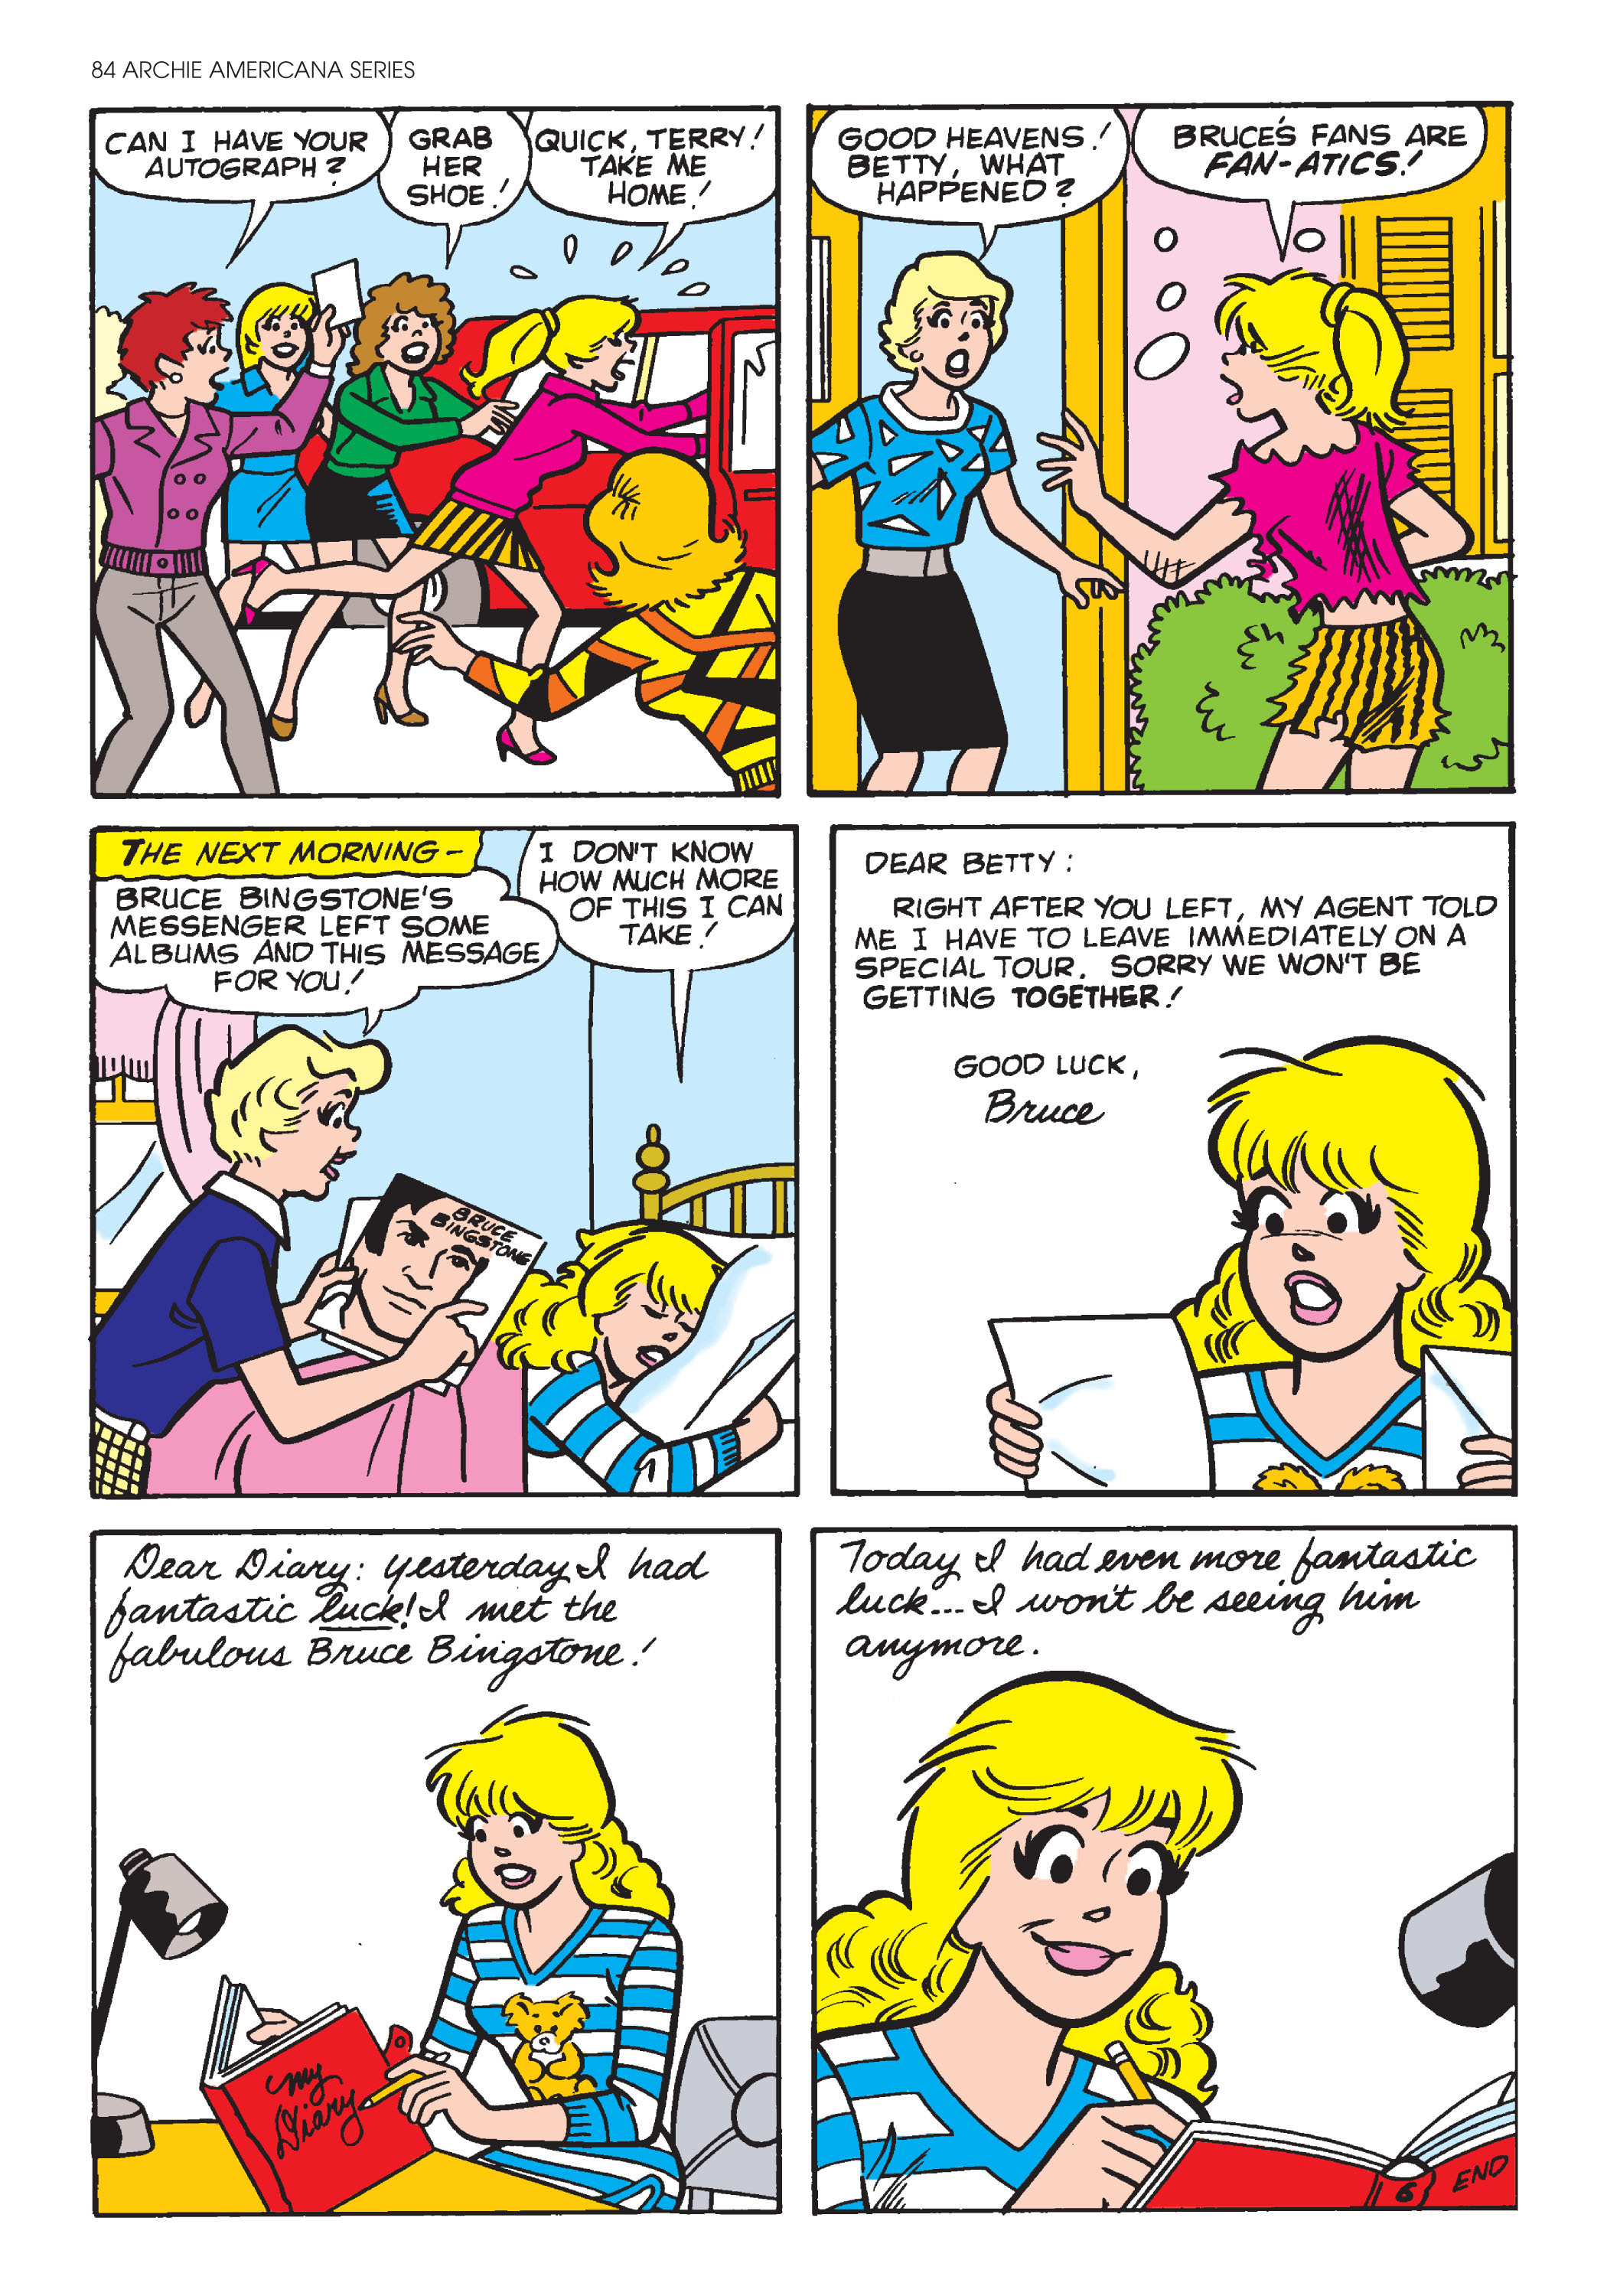 Read online Archie Americana Series comic -  Issue # TPB 5 - 86